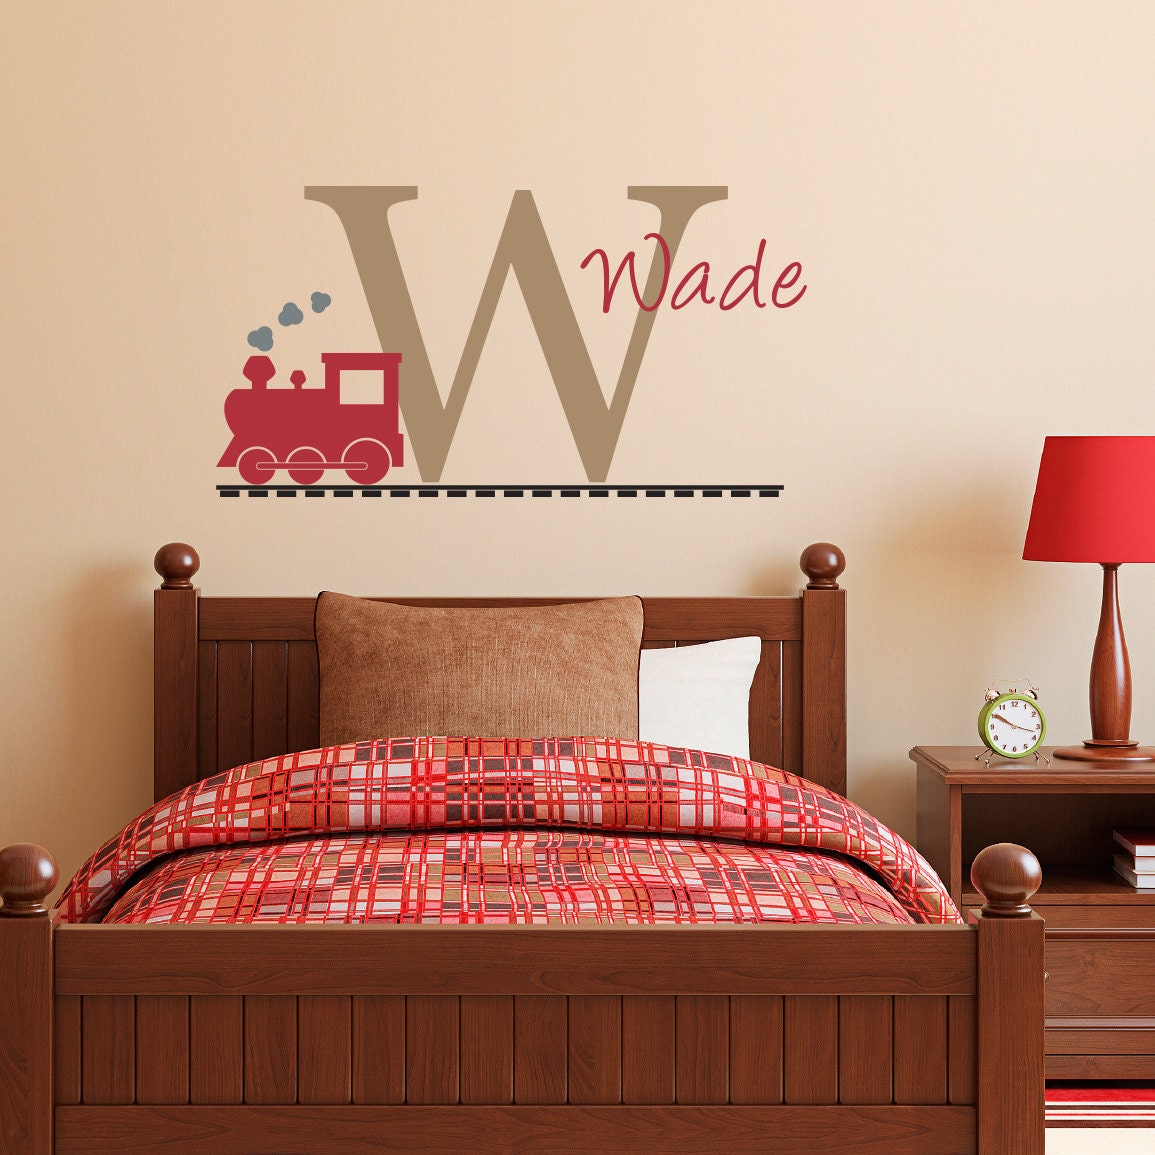 Initial Wall Decal with Name and Train - Personalized Name Decal - Train Wall Decal - Medium